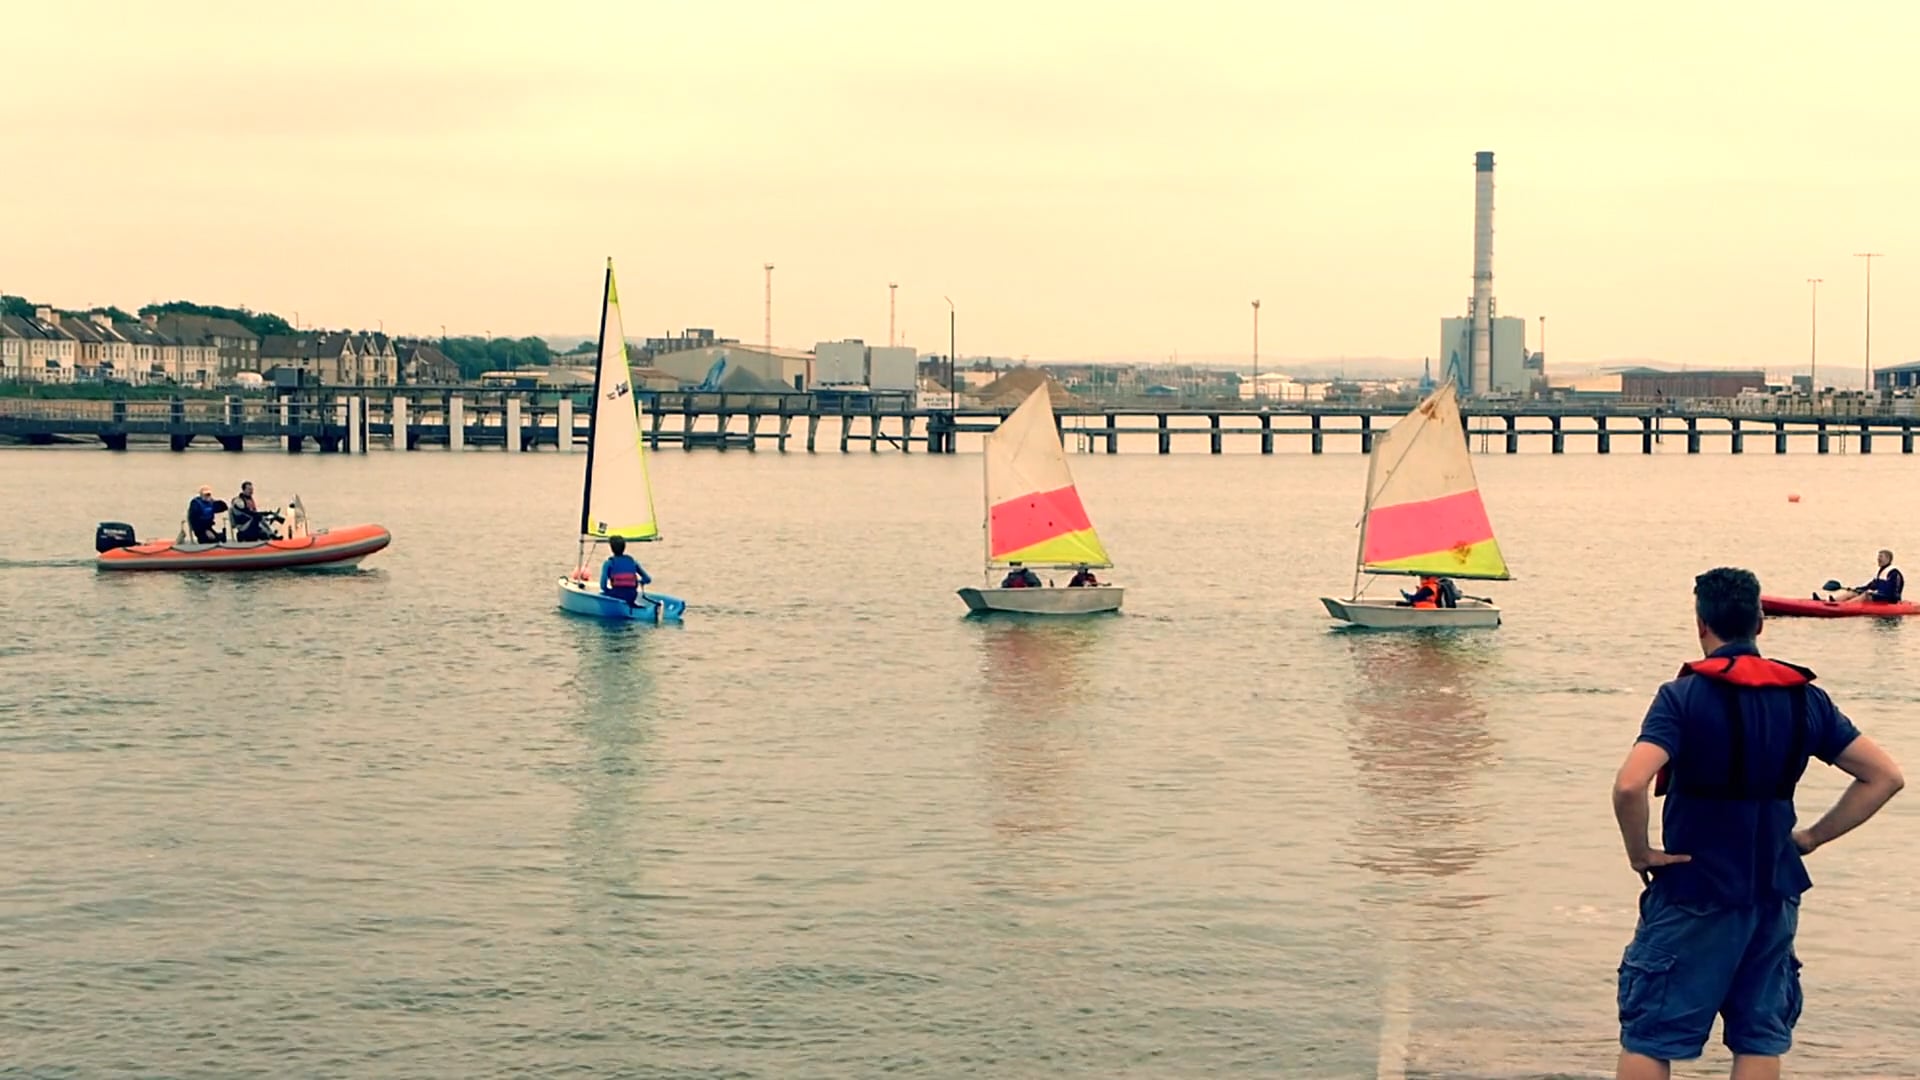 Shoreham Sailing Club: Fortnightly improvers day for family and children